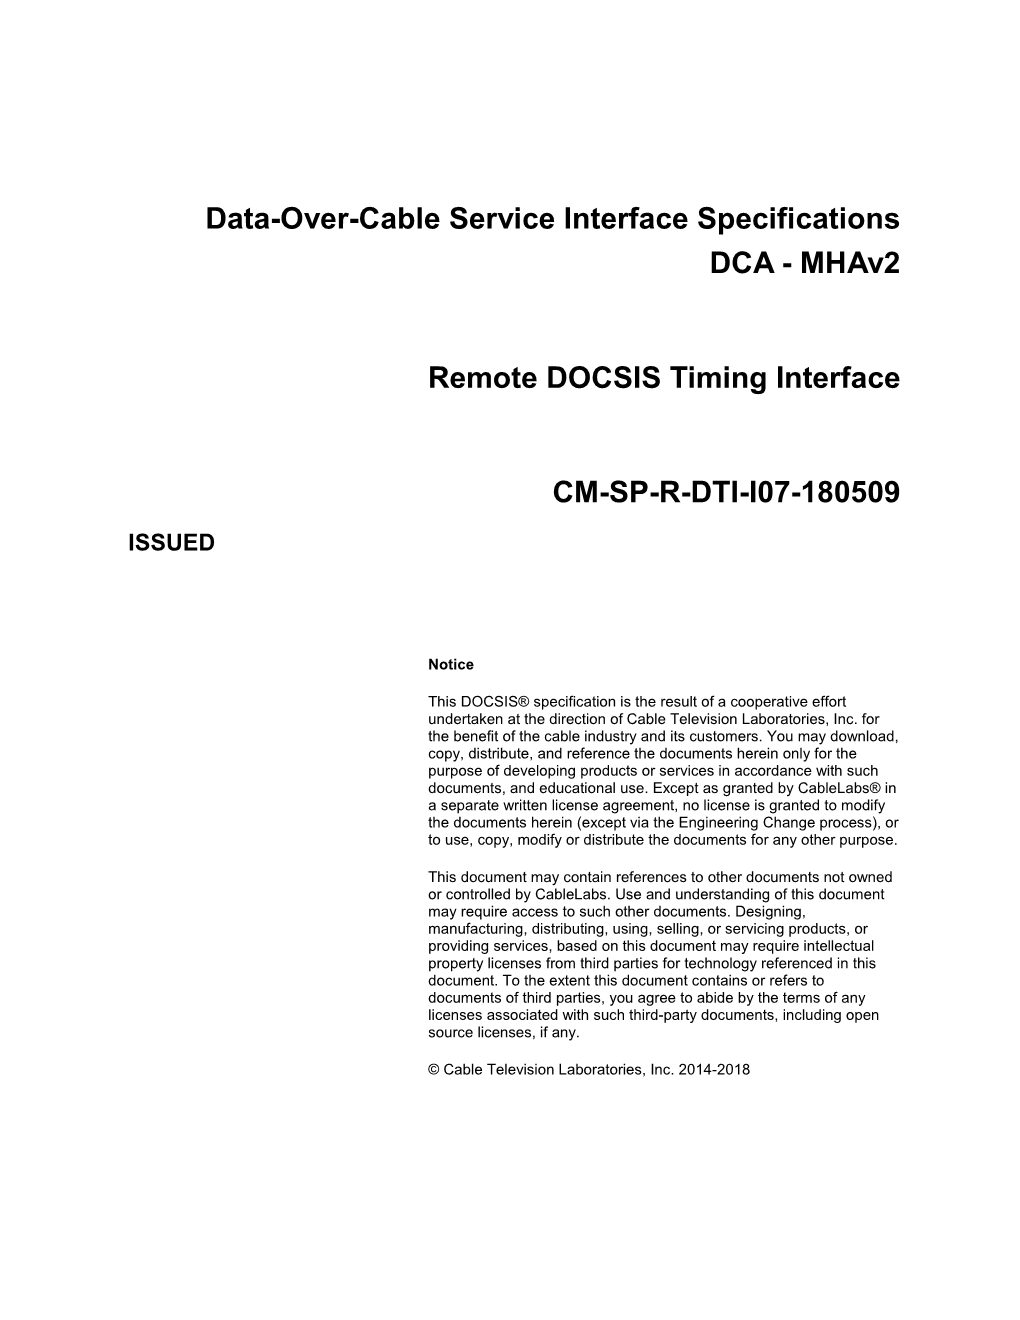 Remote DOCSIS Timing Interface